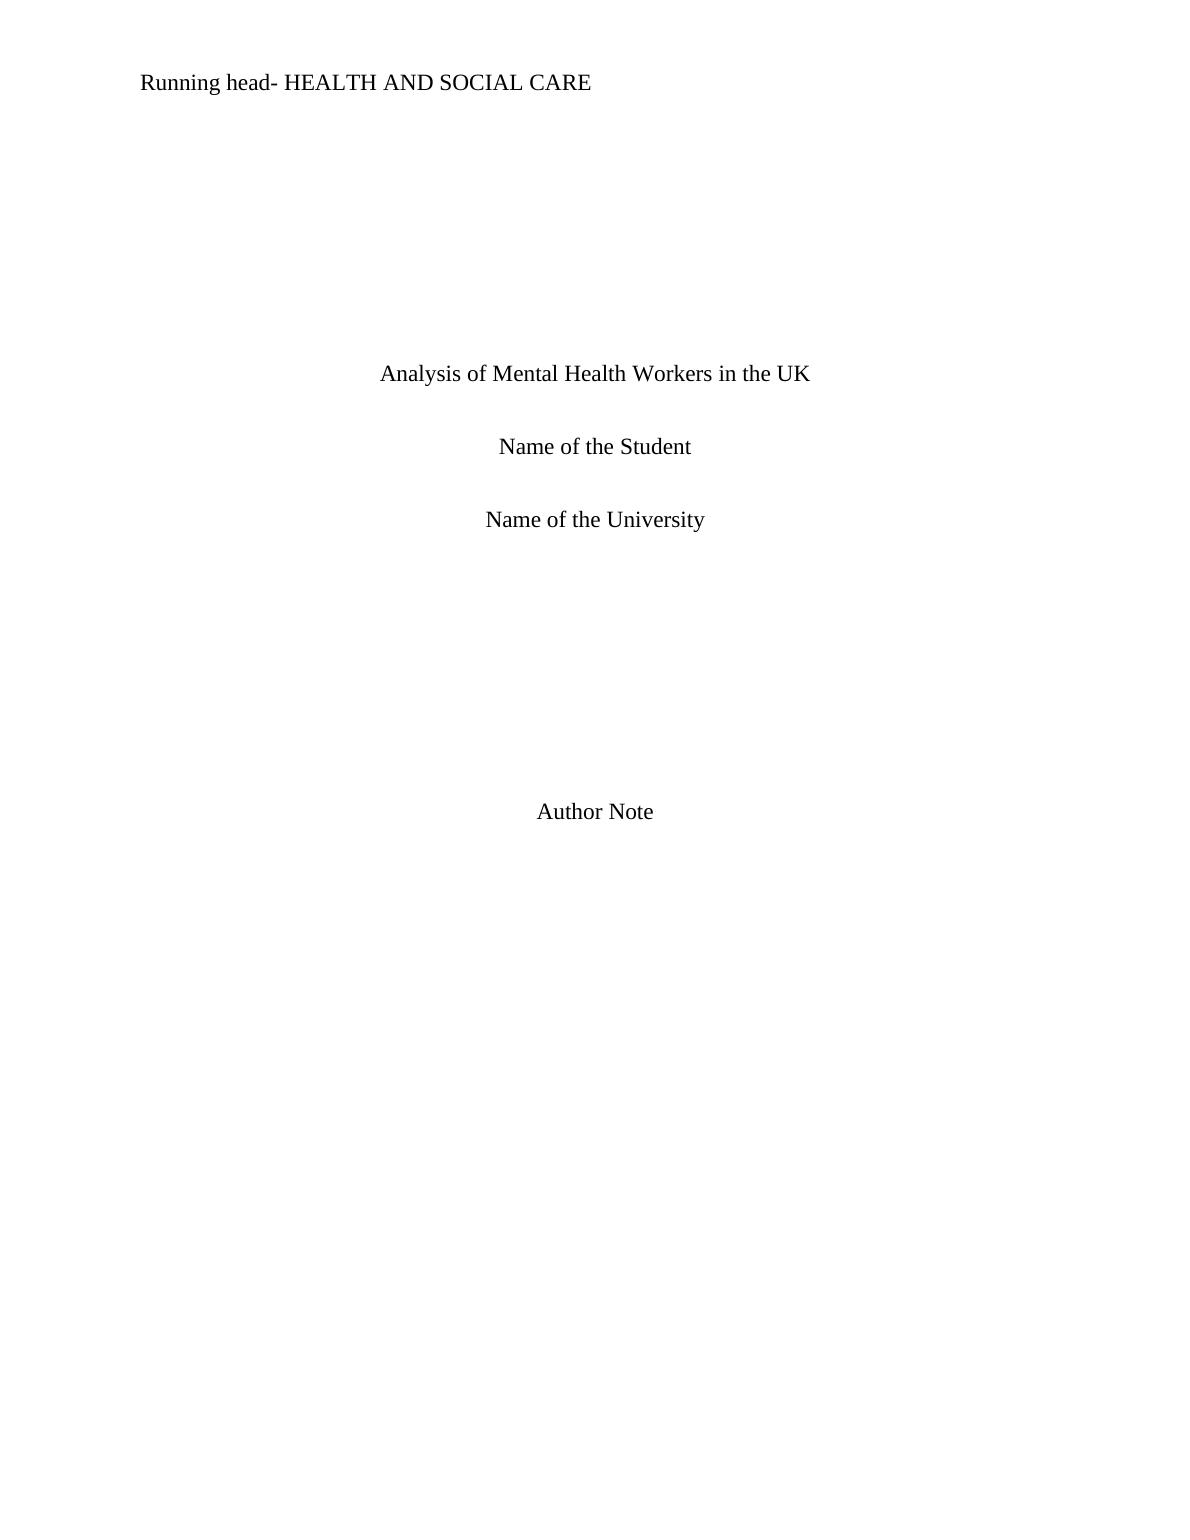 HEALTH AND SOCIAL CARE 4 Running head- HEALTH AND SOCIAL CARE Analysis of Mental Health Workers in the UK Name of the University Author Name_1